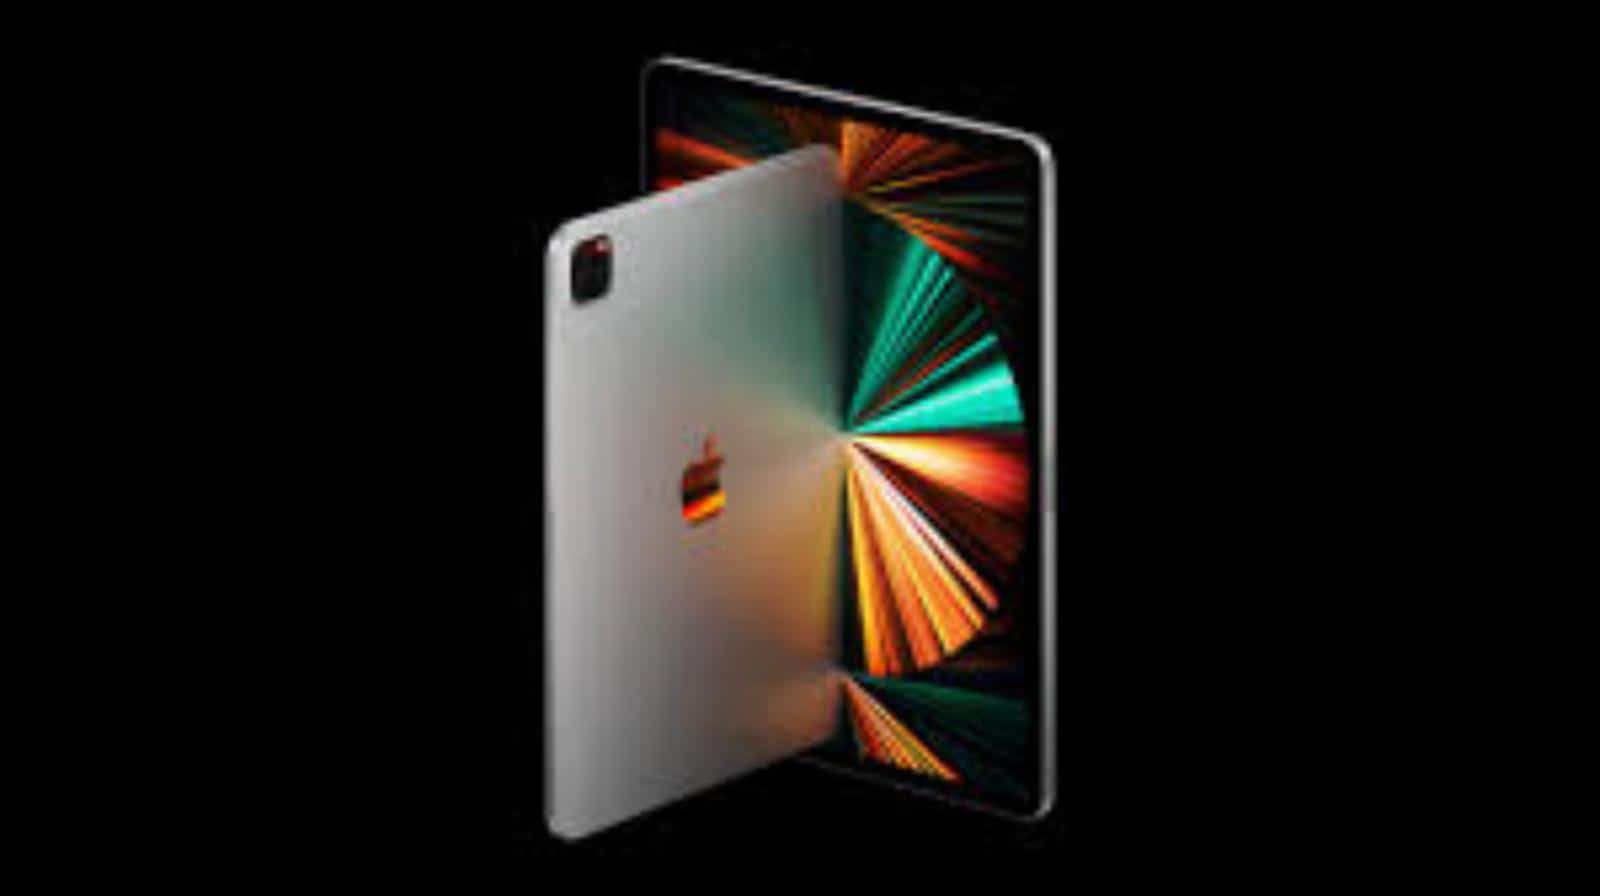 The next-generation iPad Pro screen promises to be a revolution, thanks to OLED from LG Display